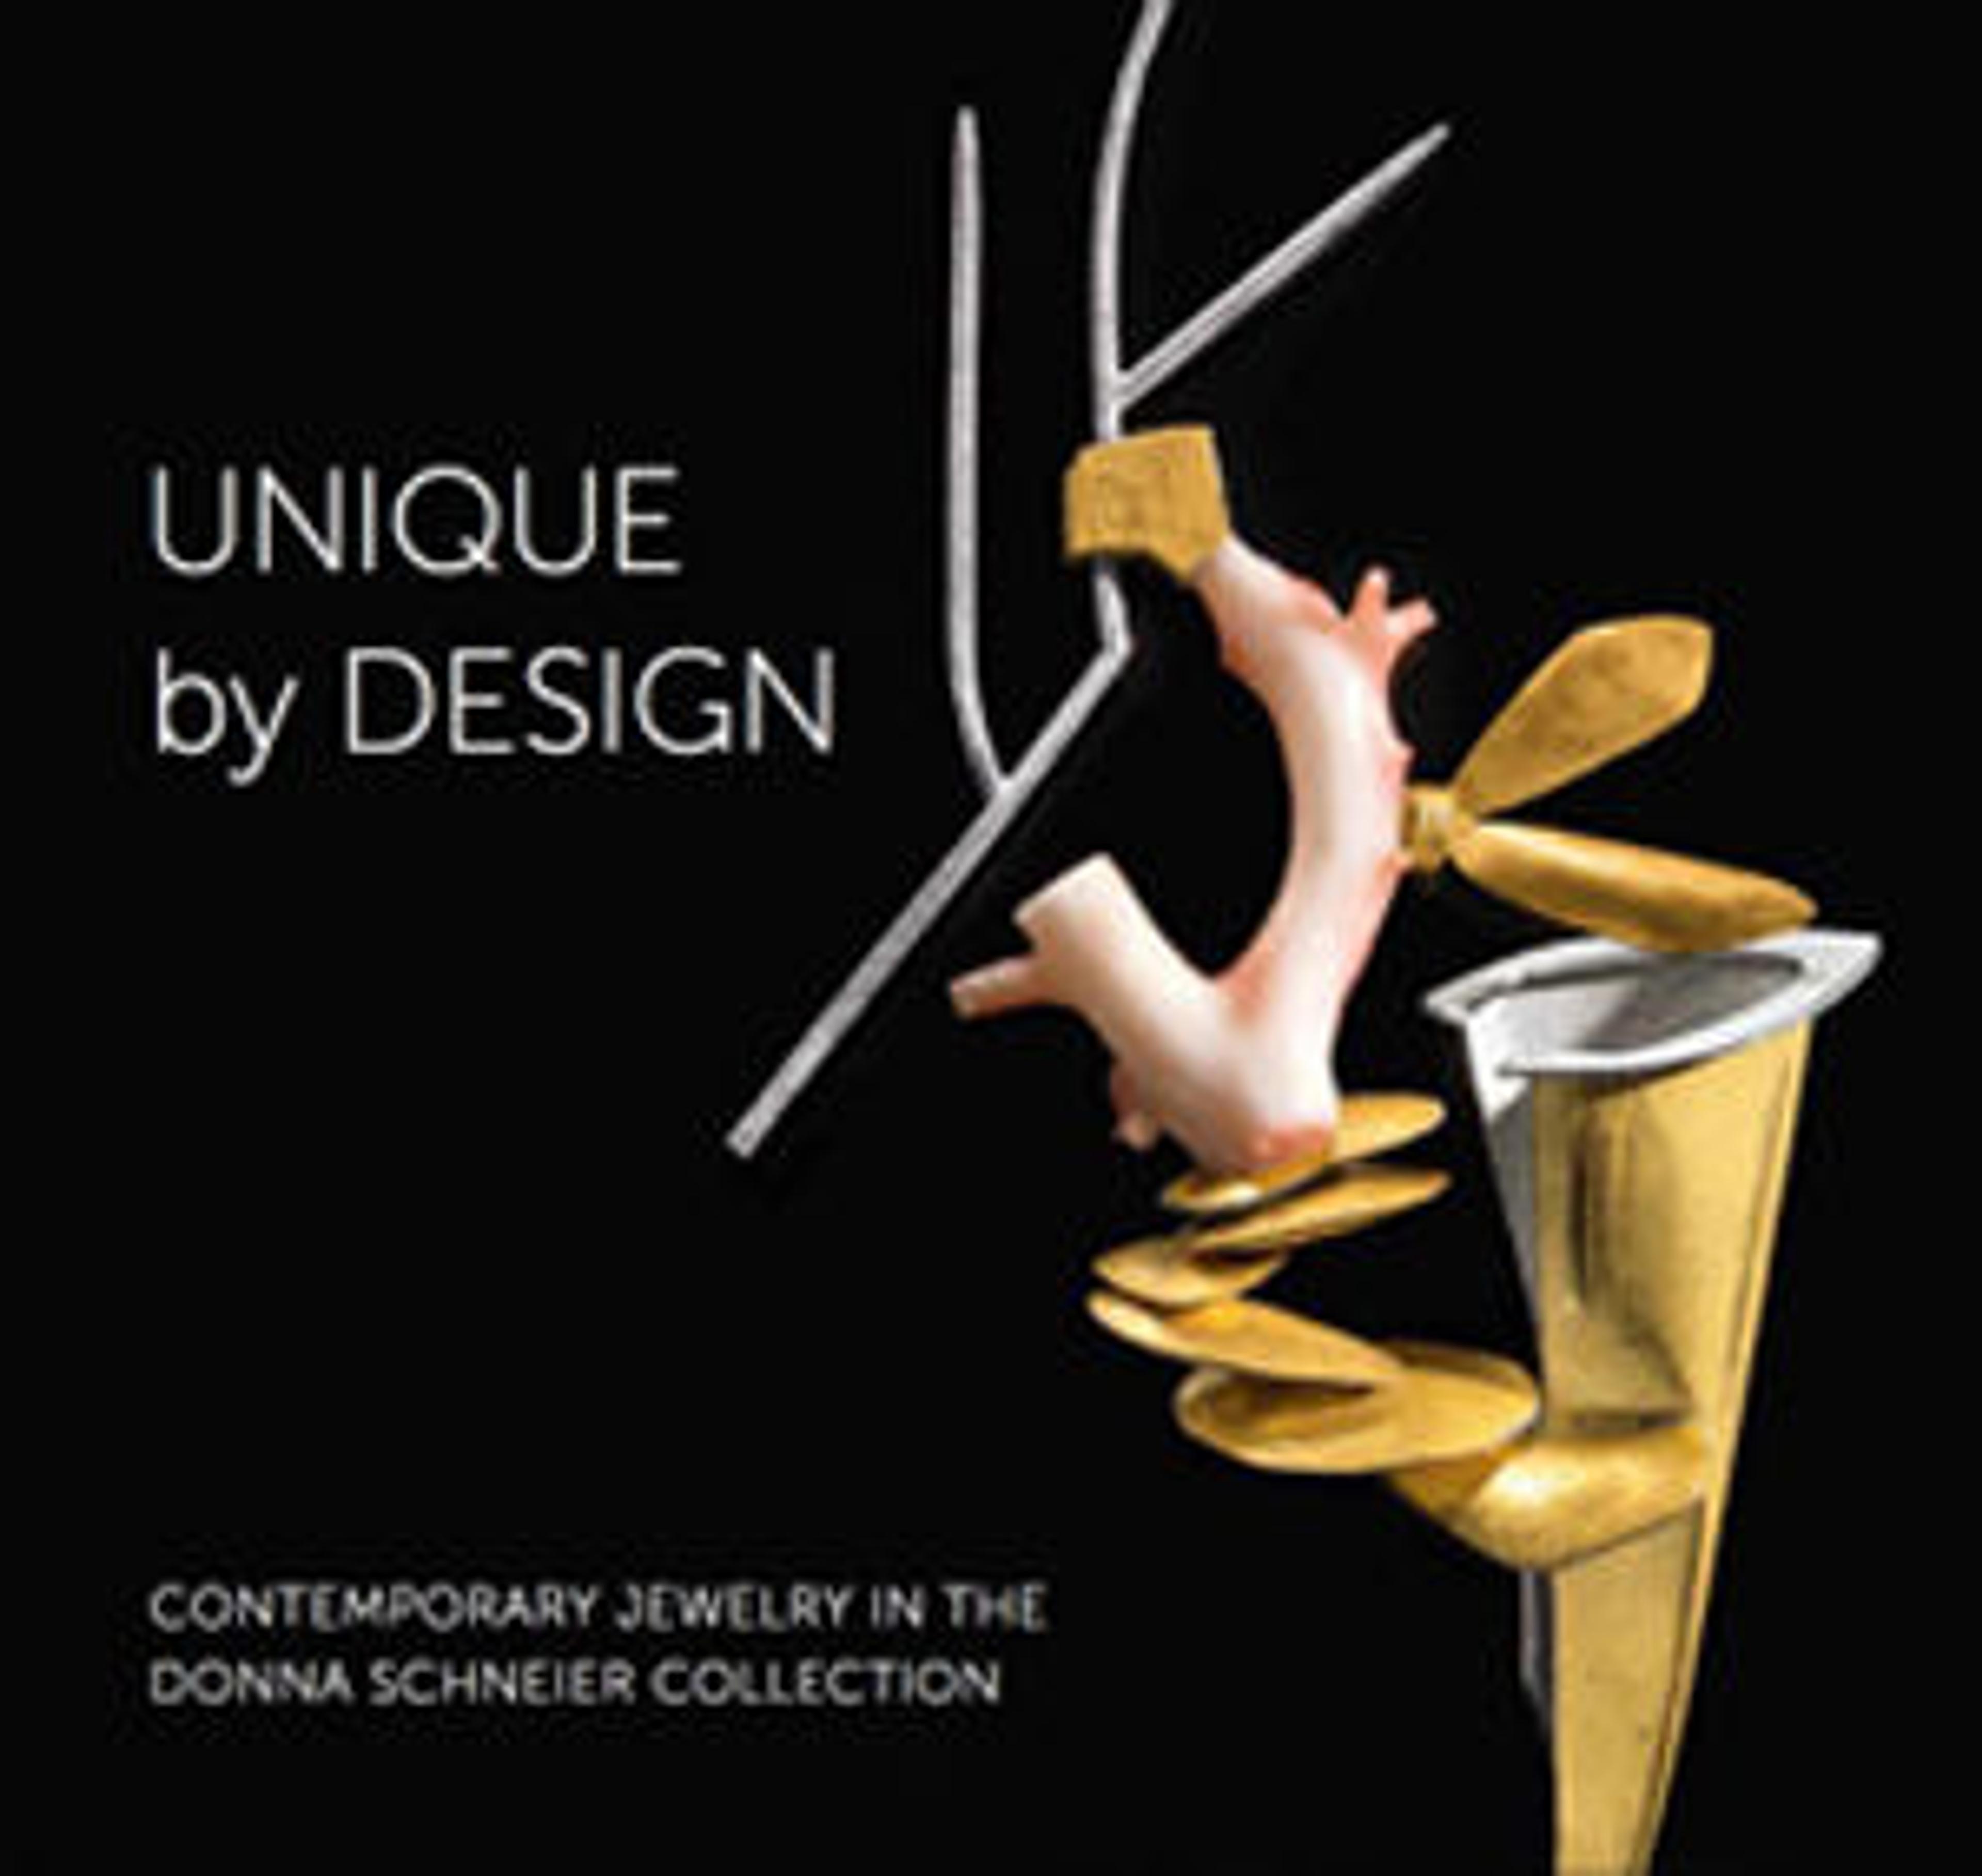 Unique by Design: Contemporary Jewelry in the Donna Schneier Collection by Suzanne Ramljak